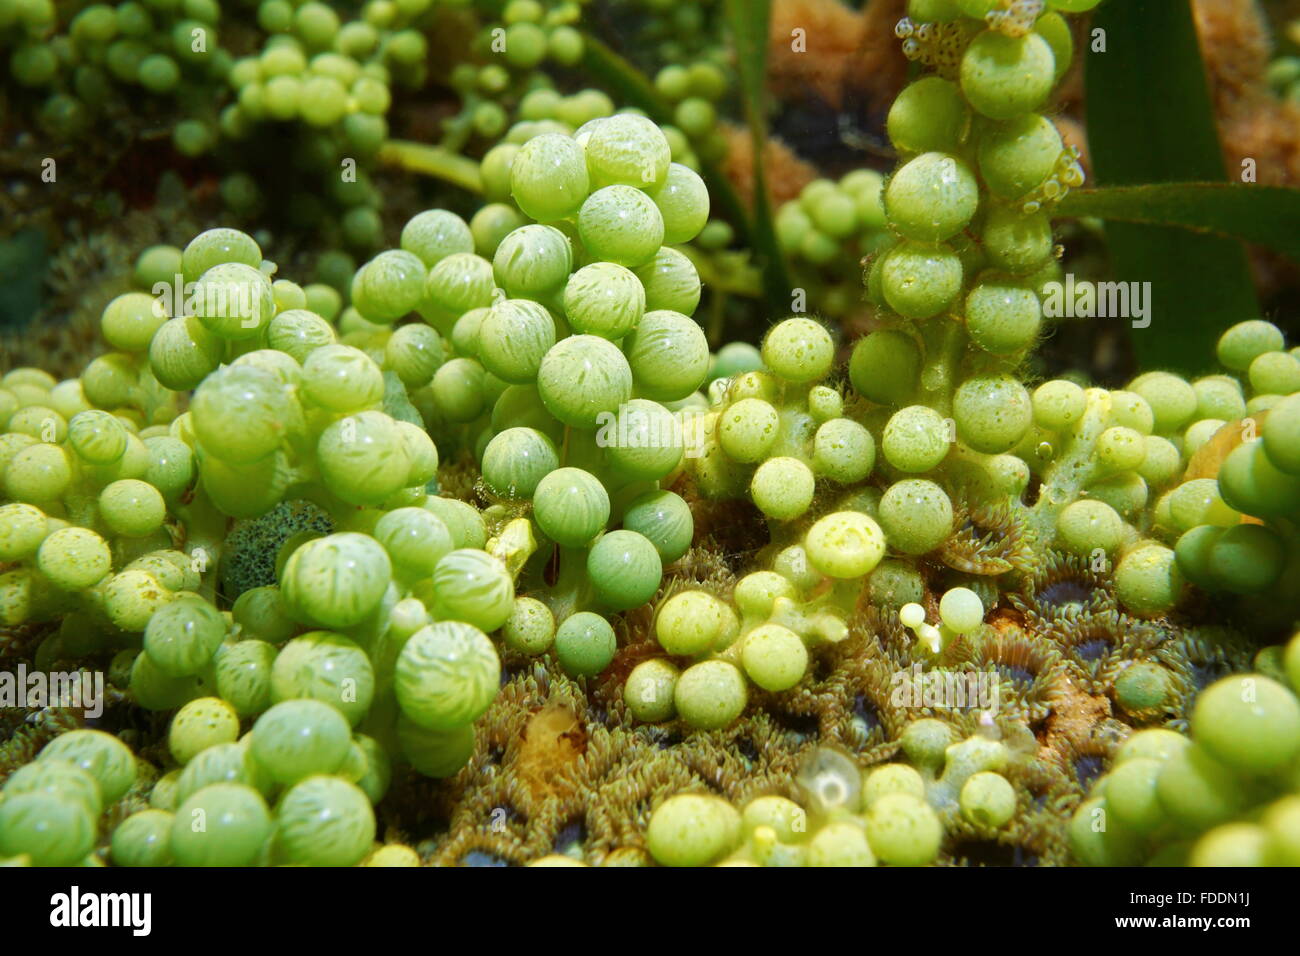 Seaweed sea grapes, Caulerpa racemosa, underwater on shallow seabed, Caribbean sea, Central America Stock Photo